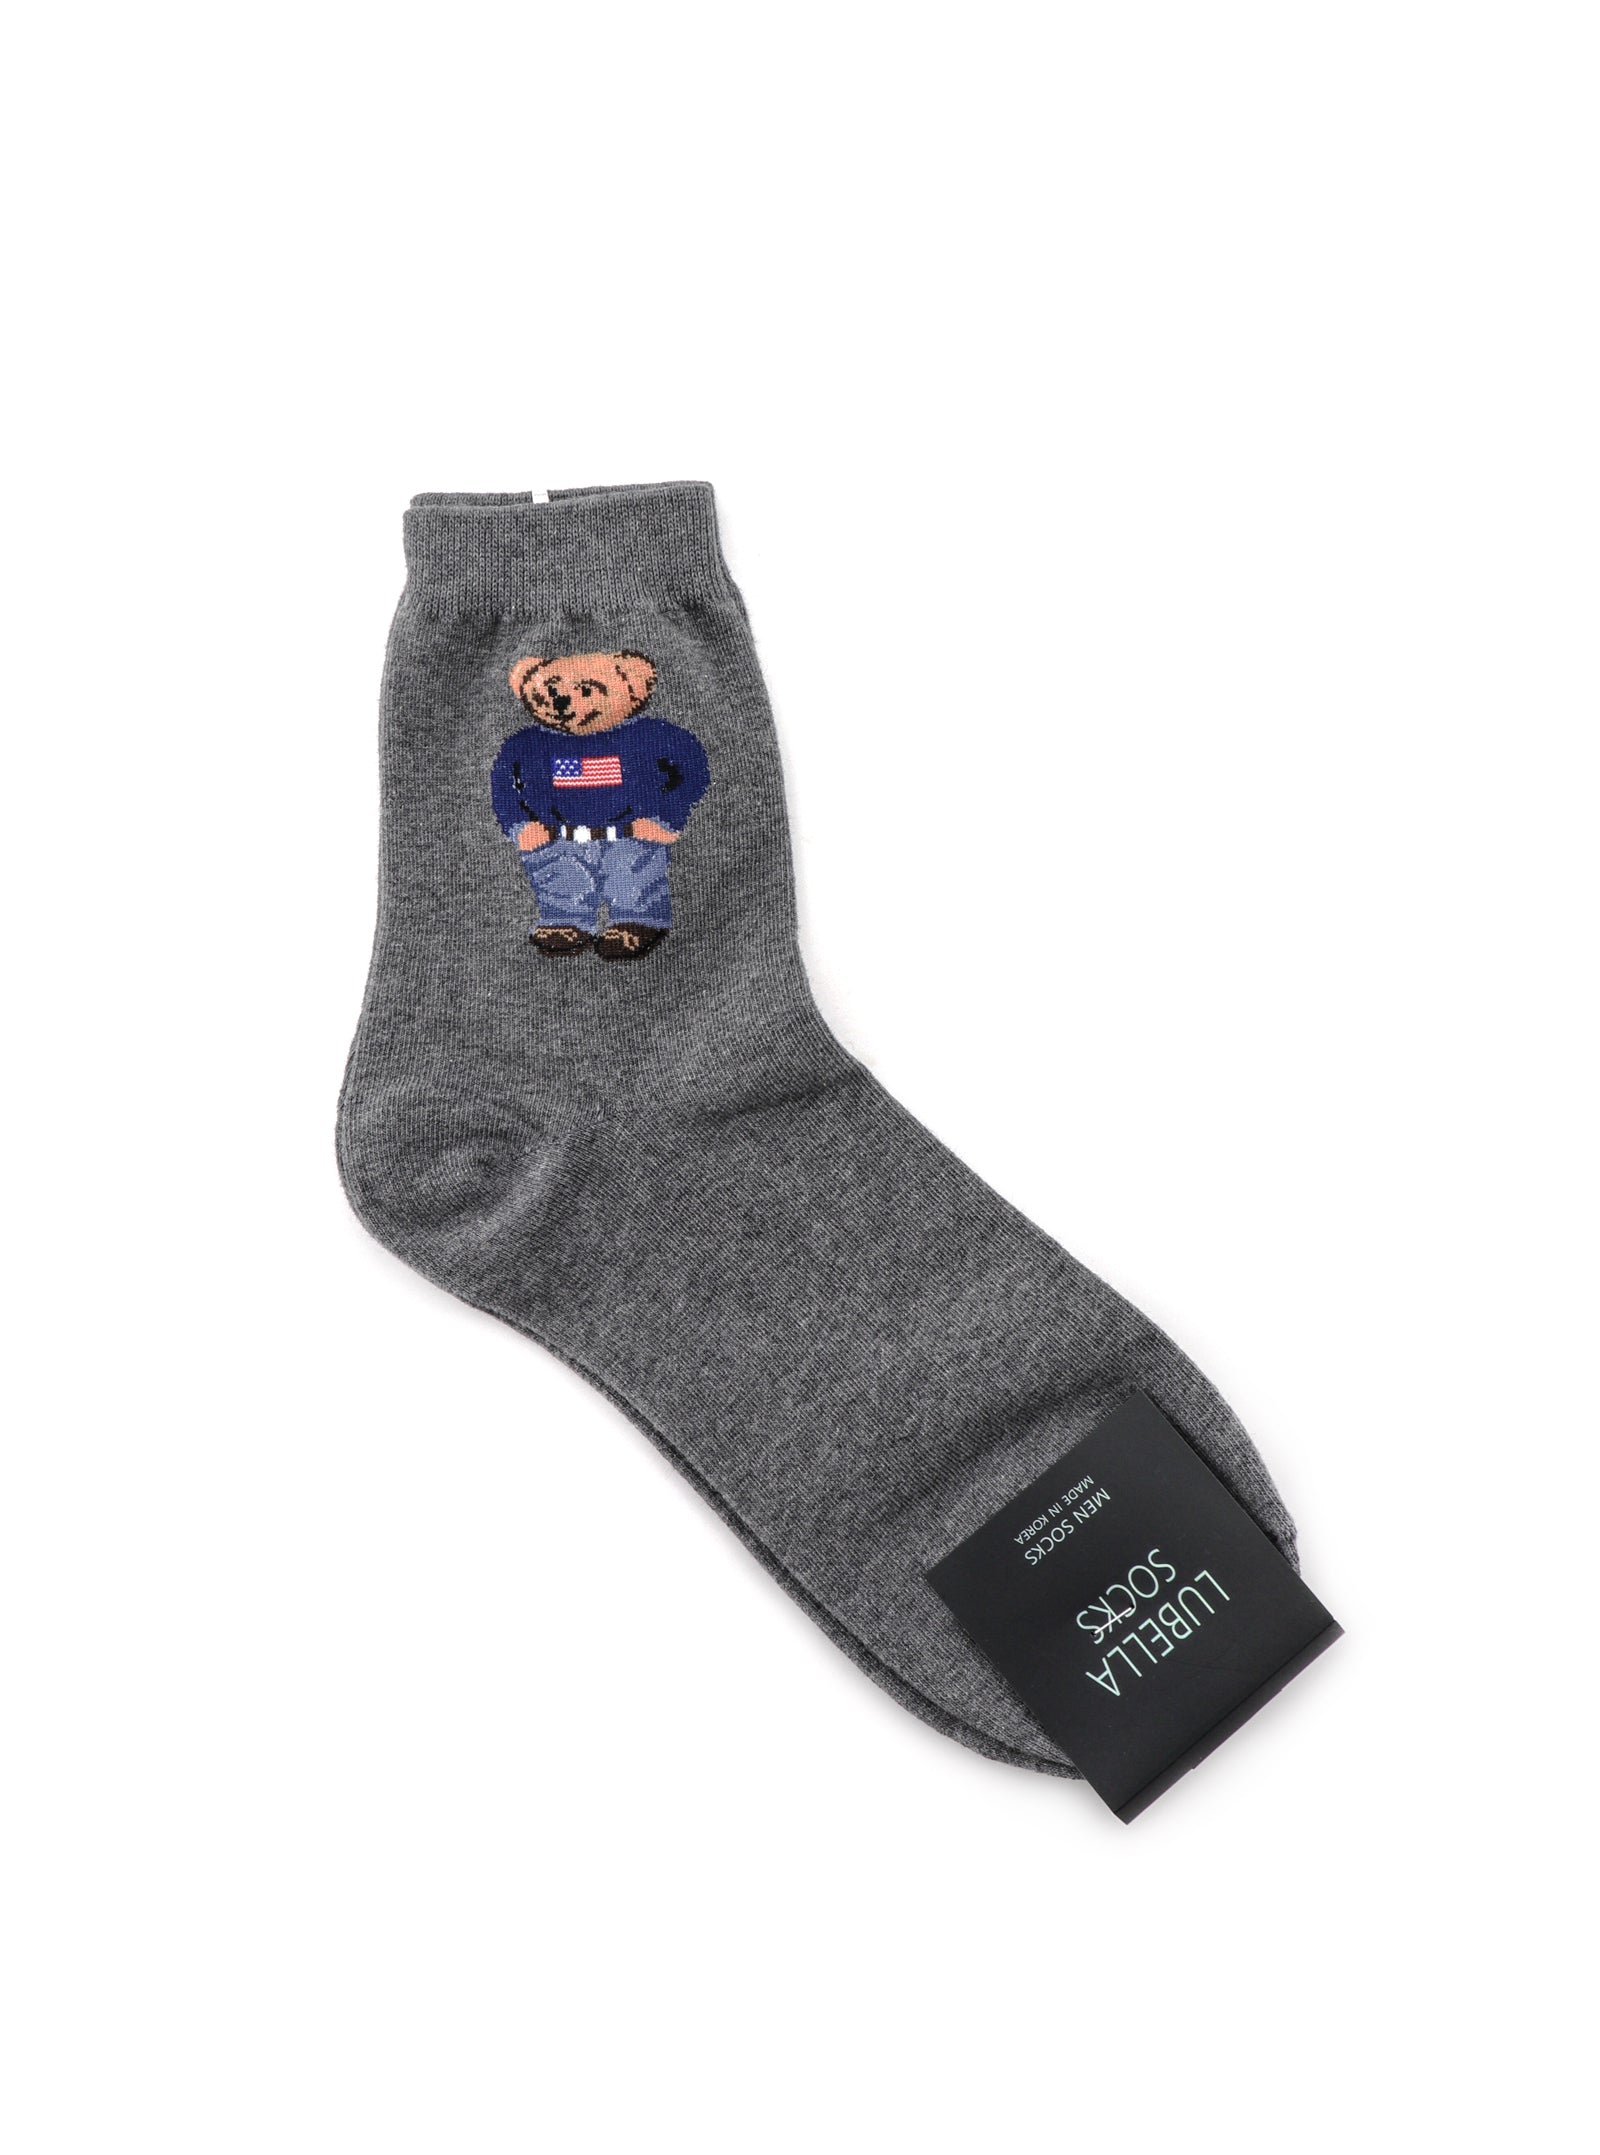 CHAUSSETTES OURS PENN MESSIEURS